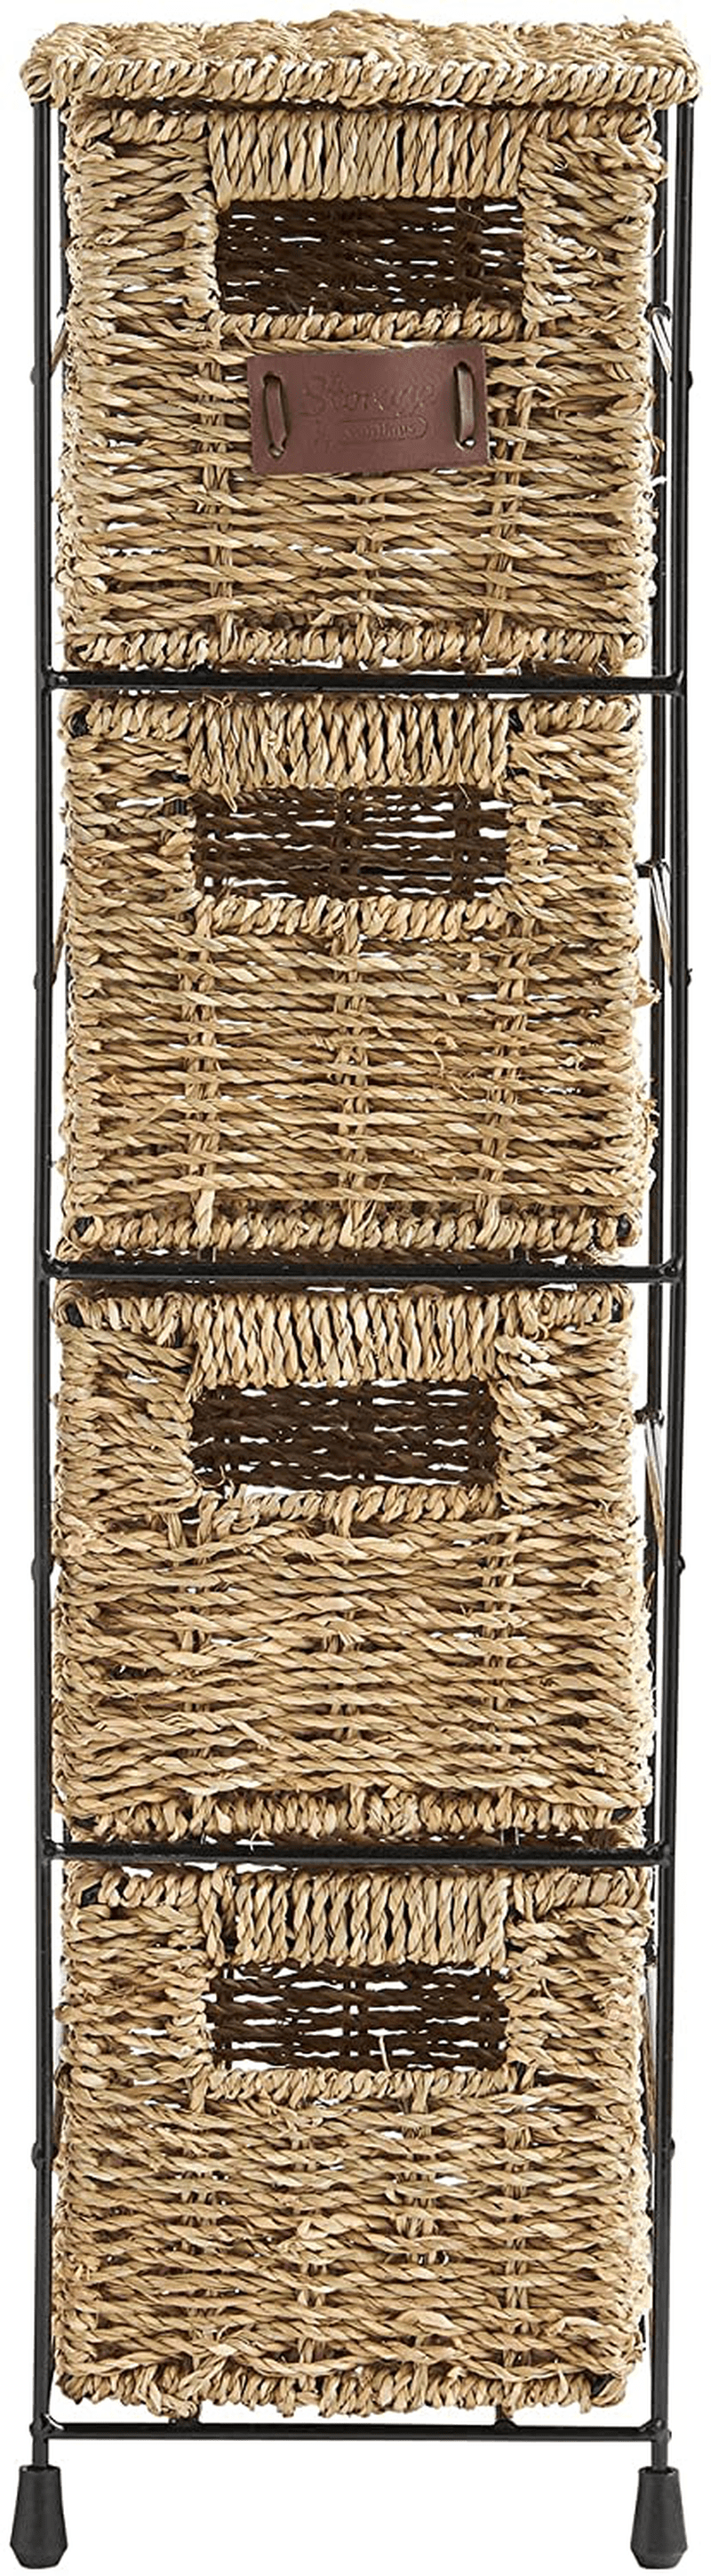 VonHaus 4 Tier Small Seagrass Basket Storage Tower Unit with Metal Frame - Ideal for Small Bathrooms & Home Storage (25.4 x 9.5 x 6.7)